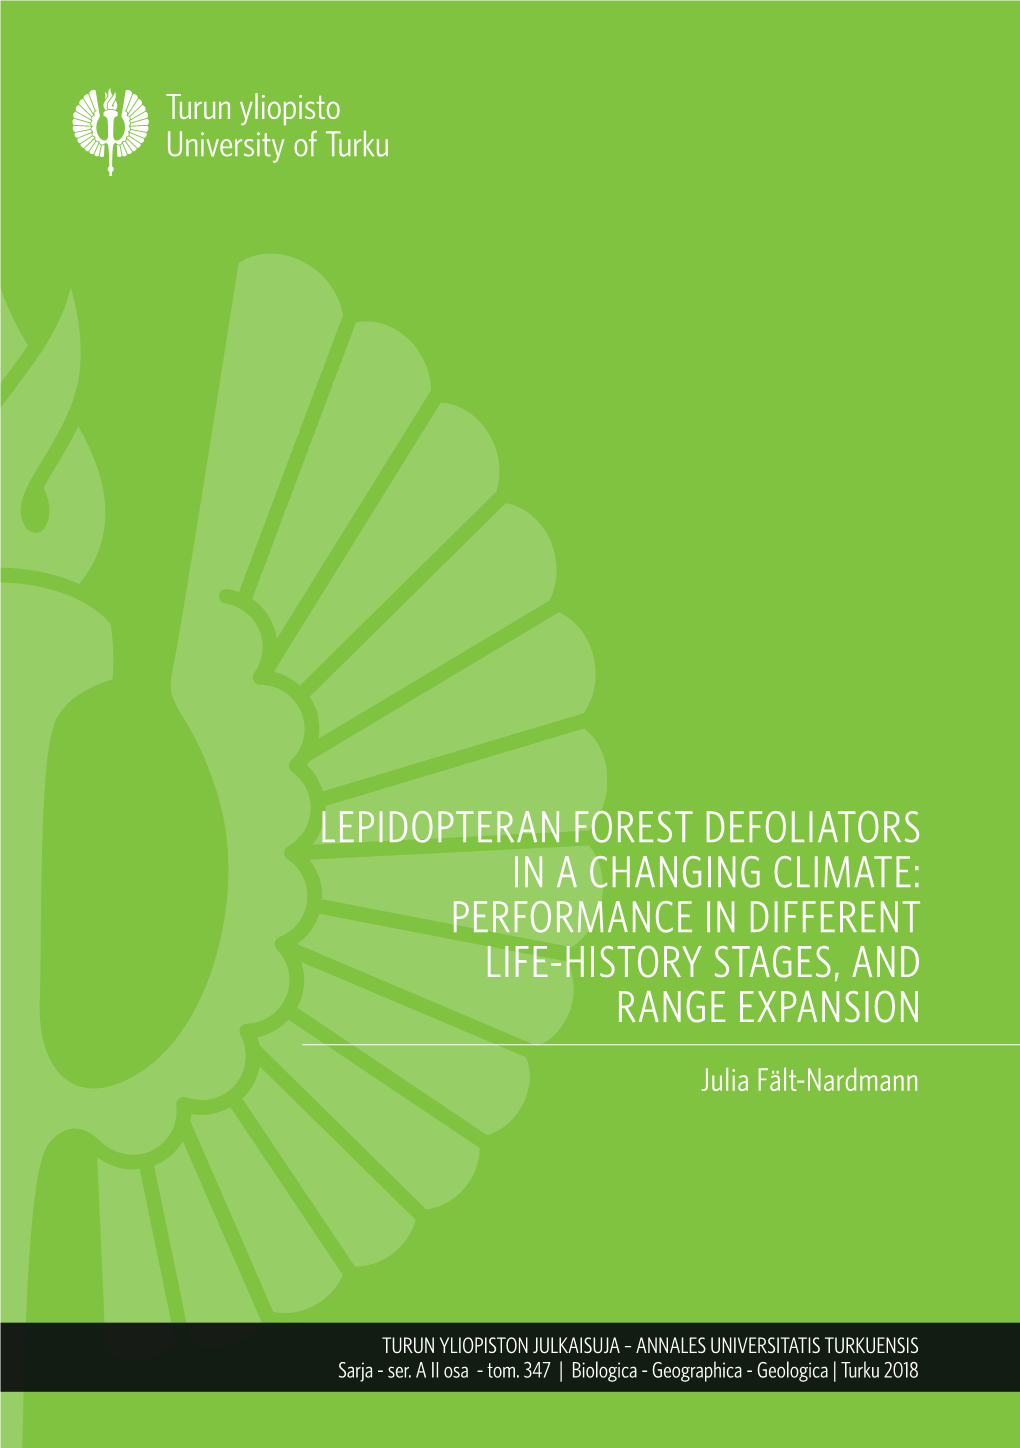 Lepidopteran Forest Defoliators in a Changing Climate: Performance in Different Life-History Stages, and Range Expansion